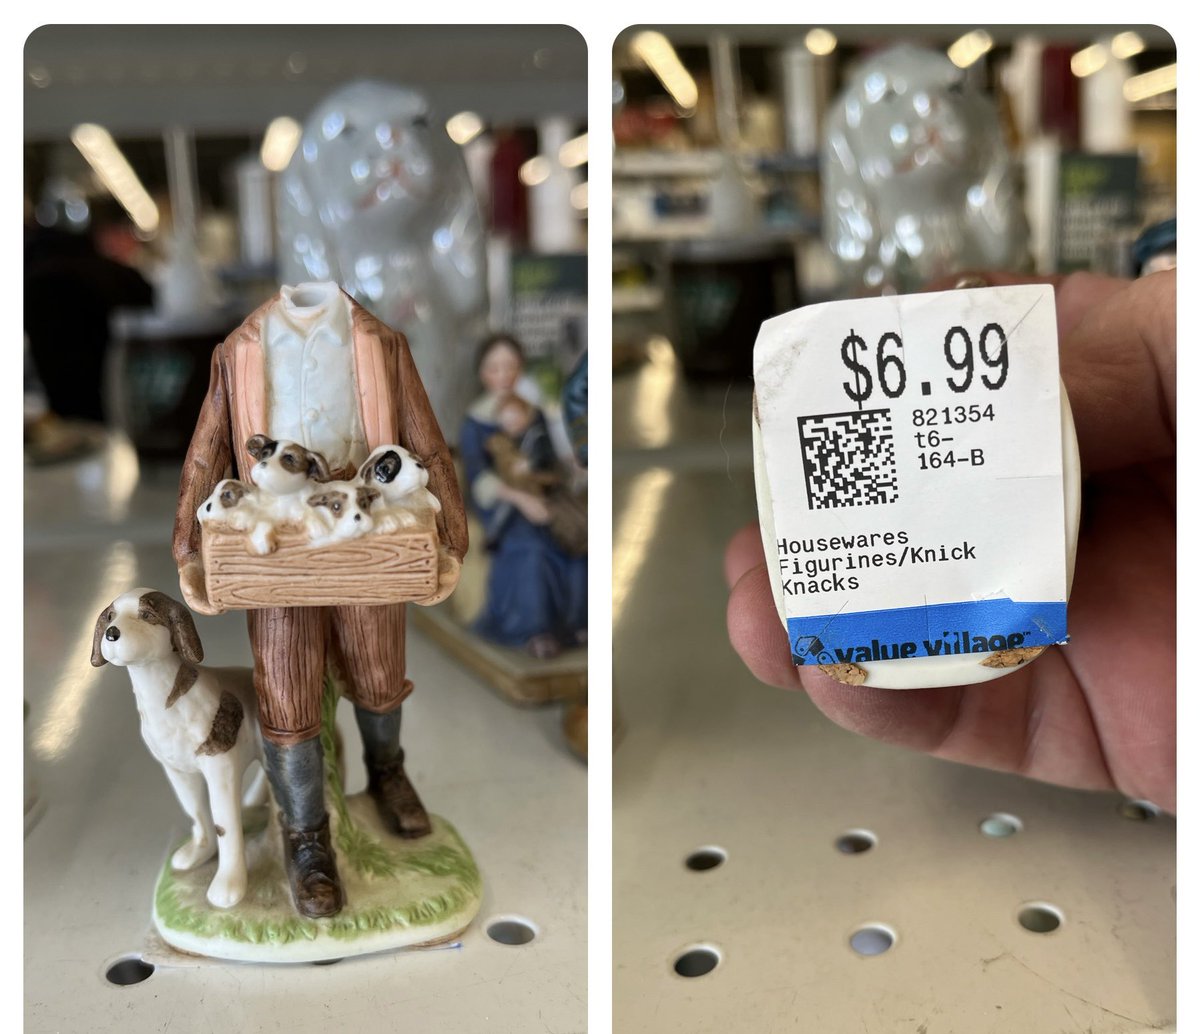 Tales From Value Village: You may think it odd that Value Village would attempt to sell a decapitated ornament for $6.99. But this must be the infamous “Headless Puppy Mill Operator” whose legend we used to scare each other with around the fire at camp.